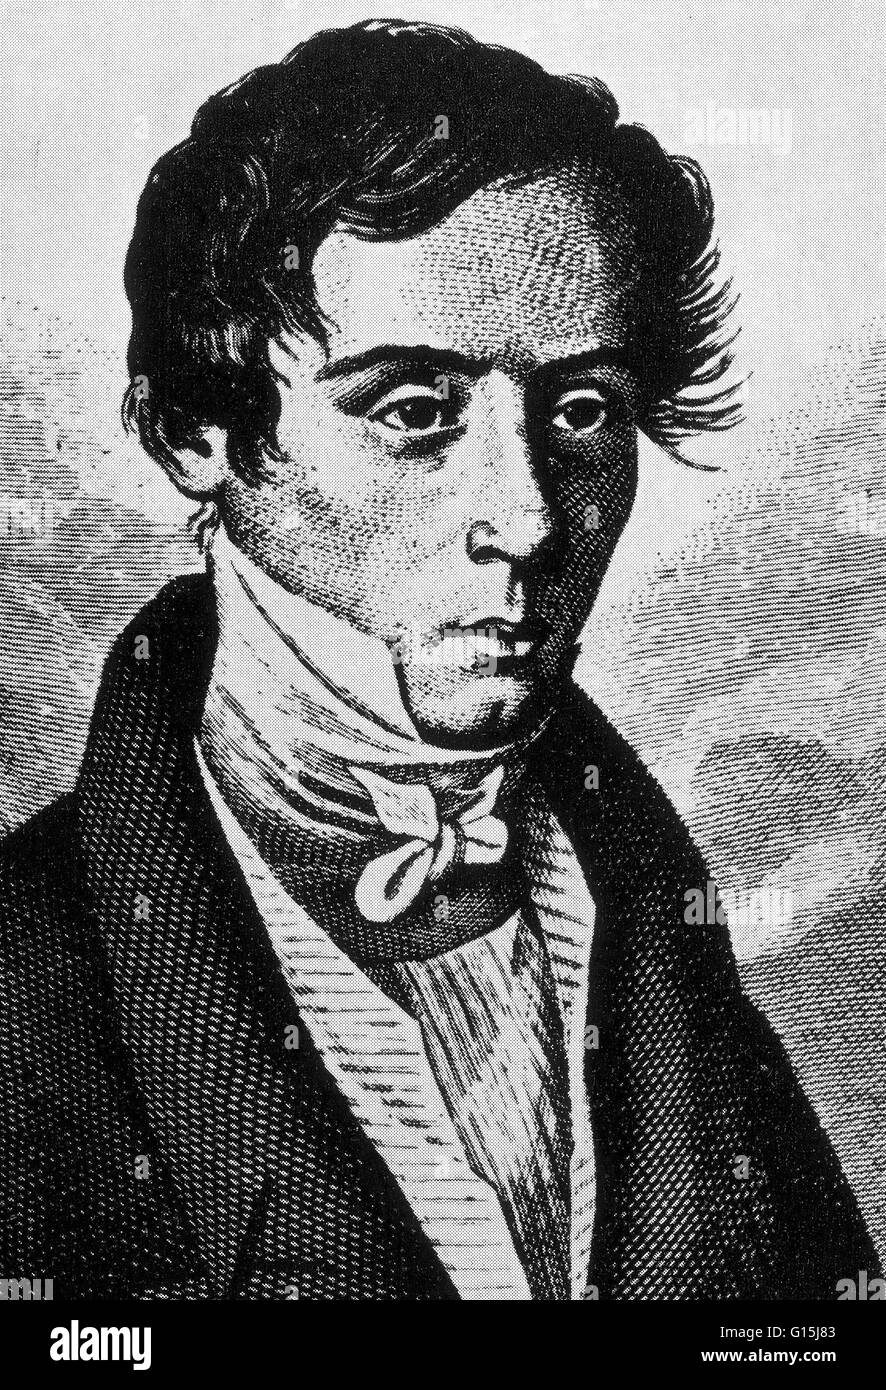 Augustin-Jean Fresnel (1788-1827), was a French engineer who contributed significantly to the establishment of the theory of wave optics. Fresnel studied the behavior of light both theoretically and experimentally. He is perhaps best known as the inventor Stock Photo